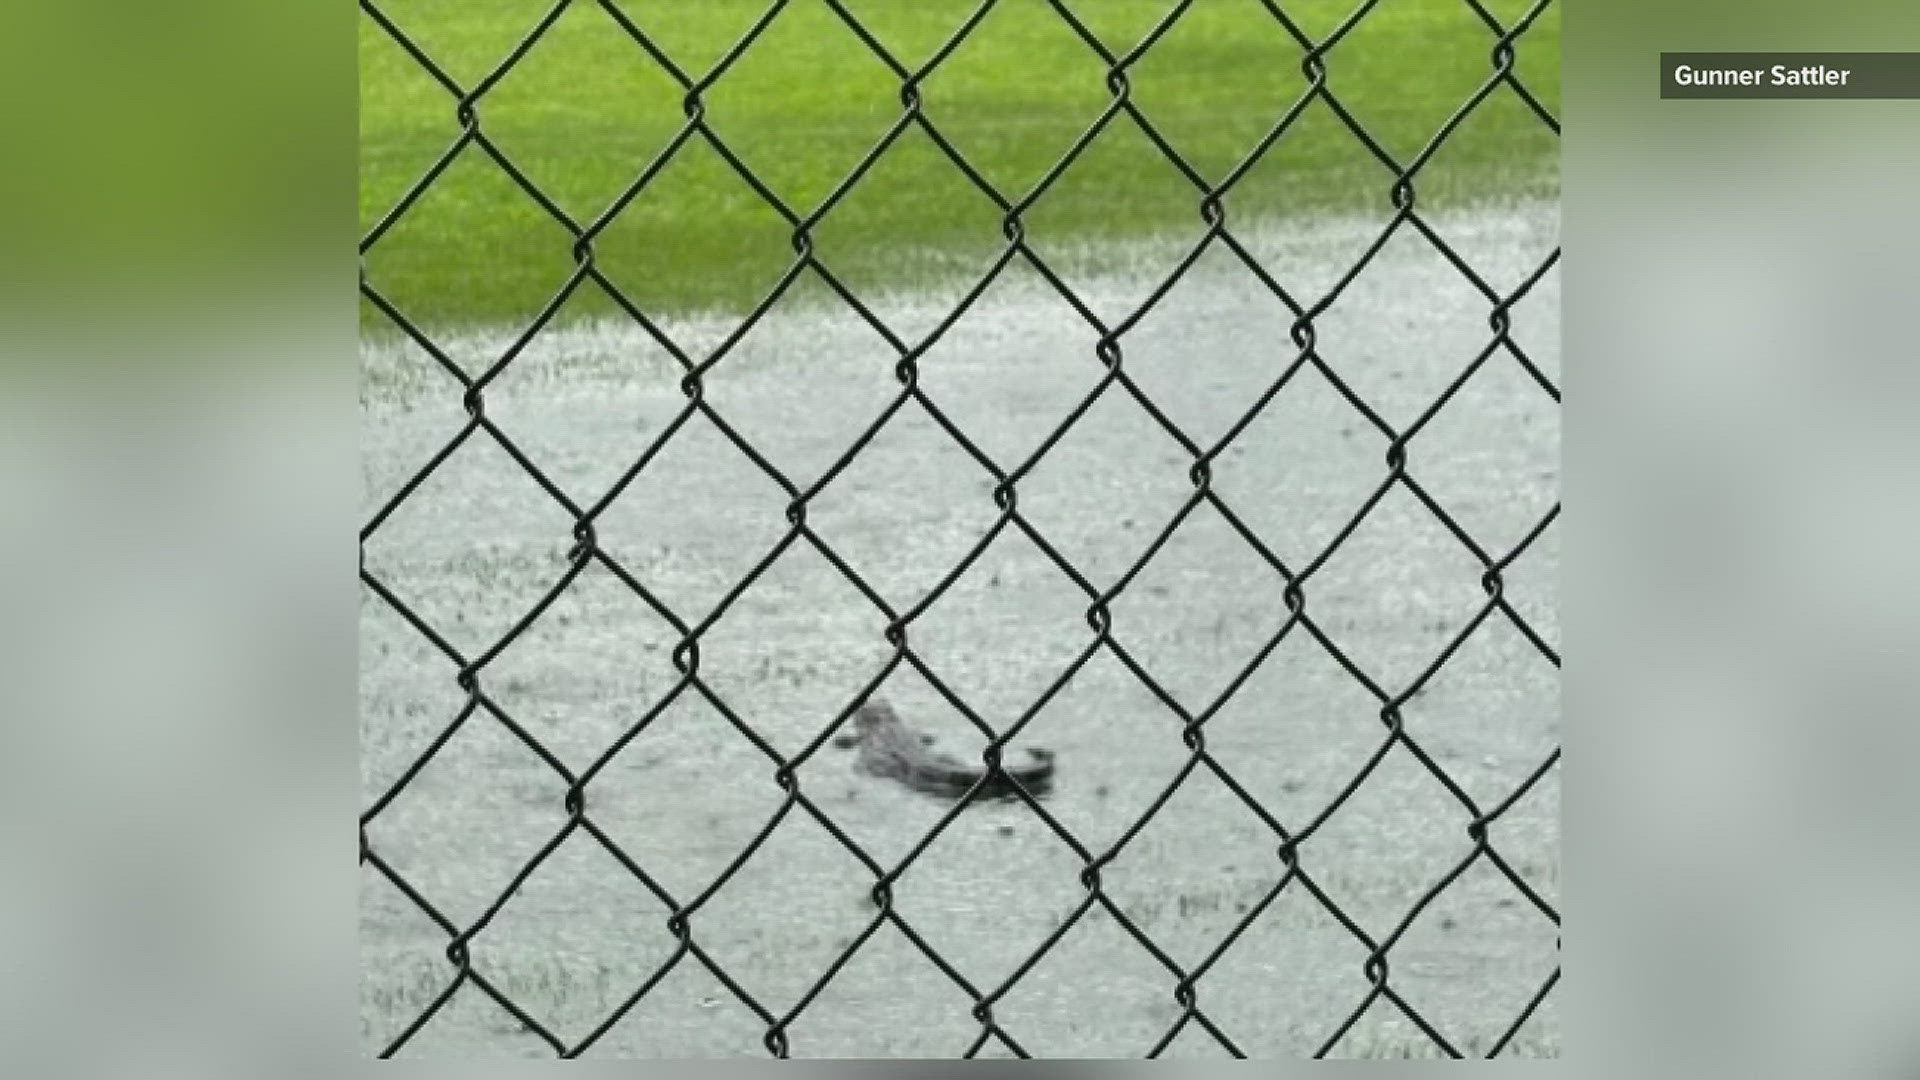 HJ students were befuddled to find the baby gator making himself at home on the diamond.